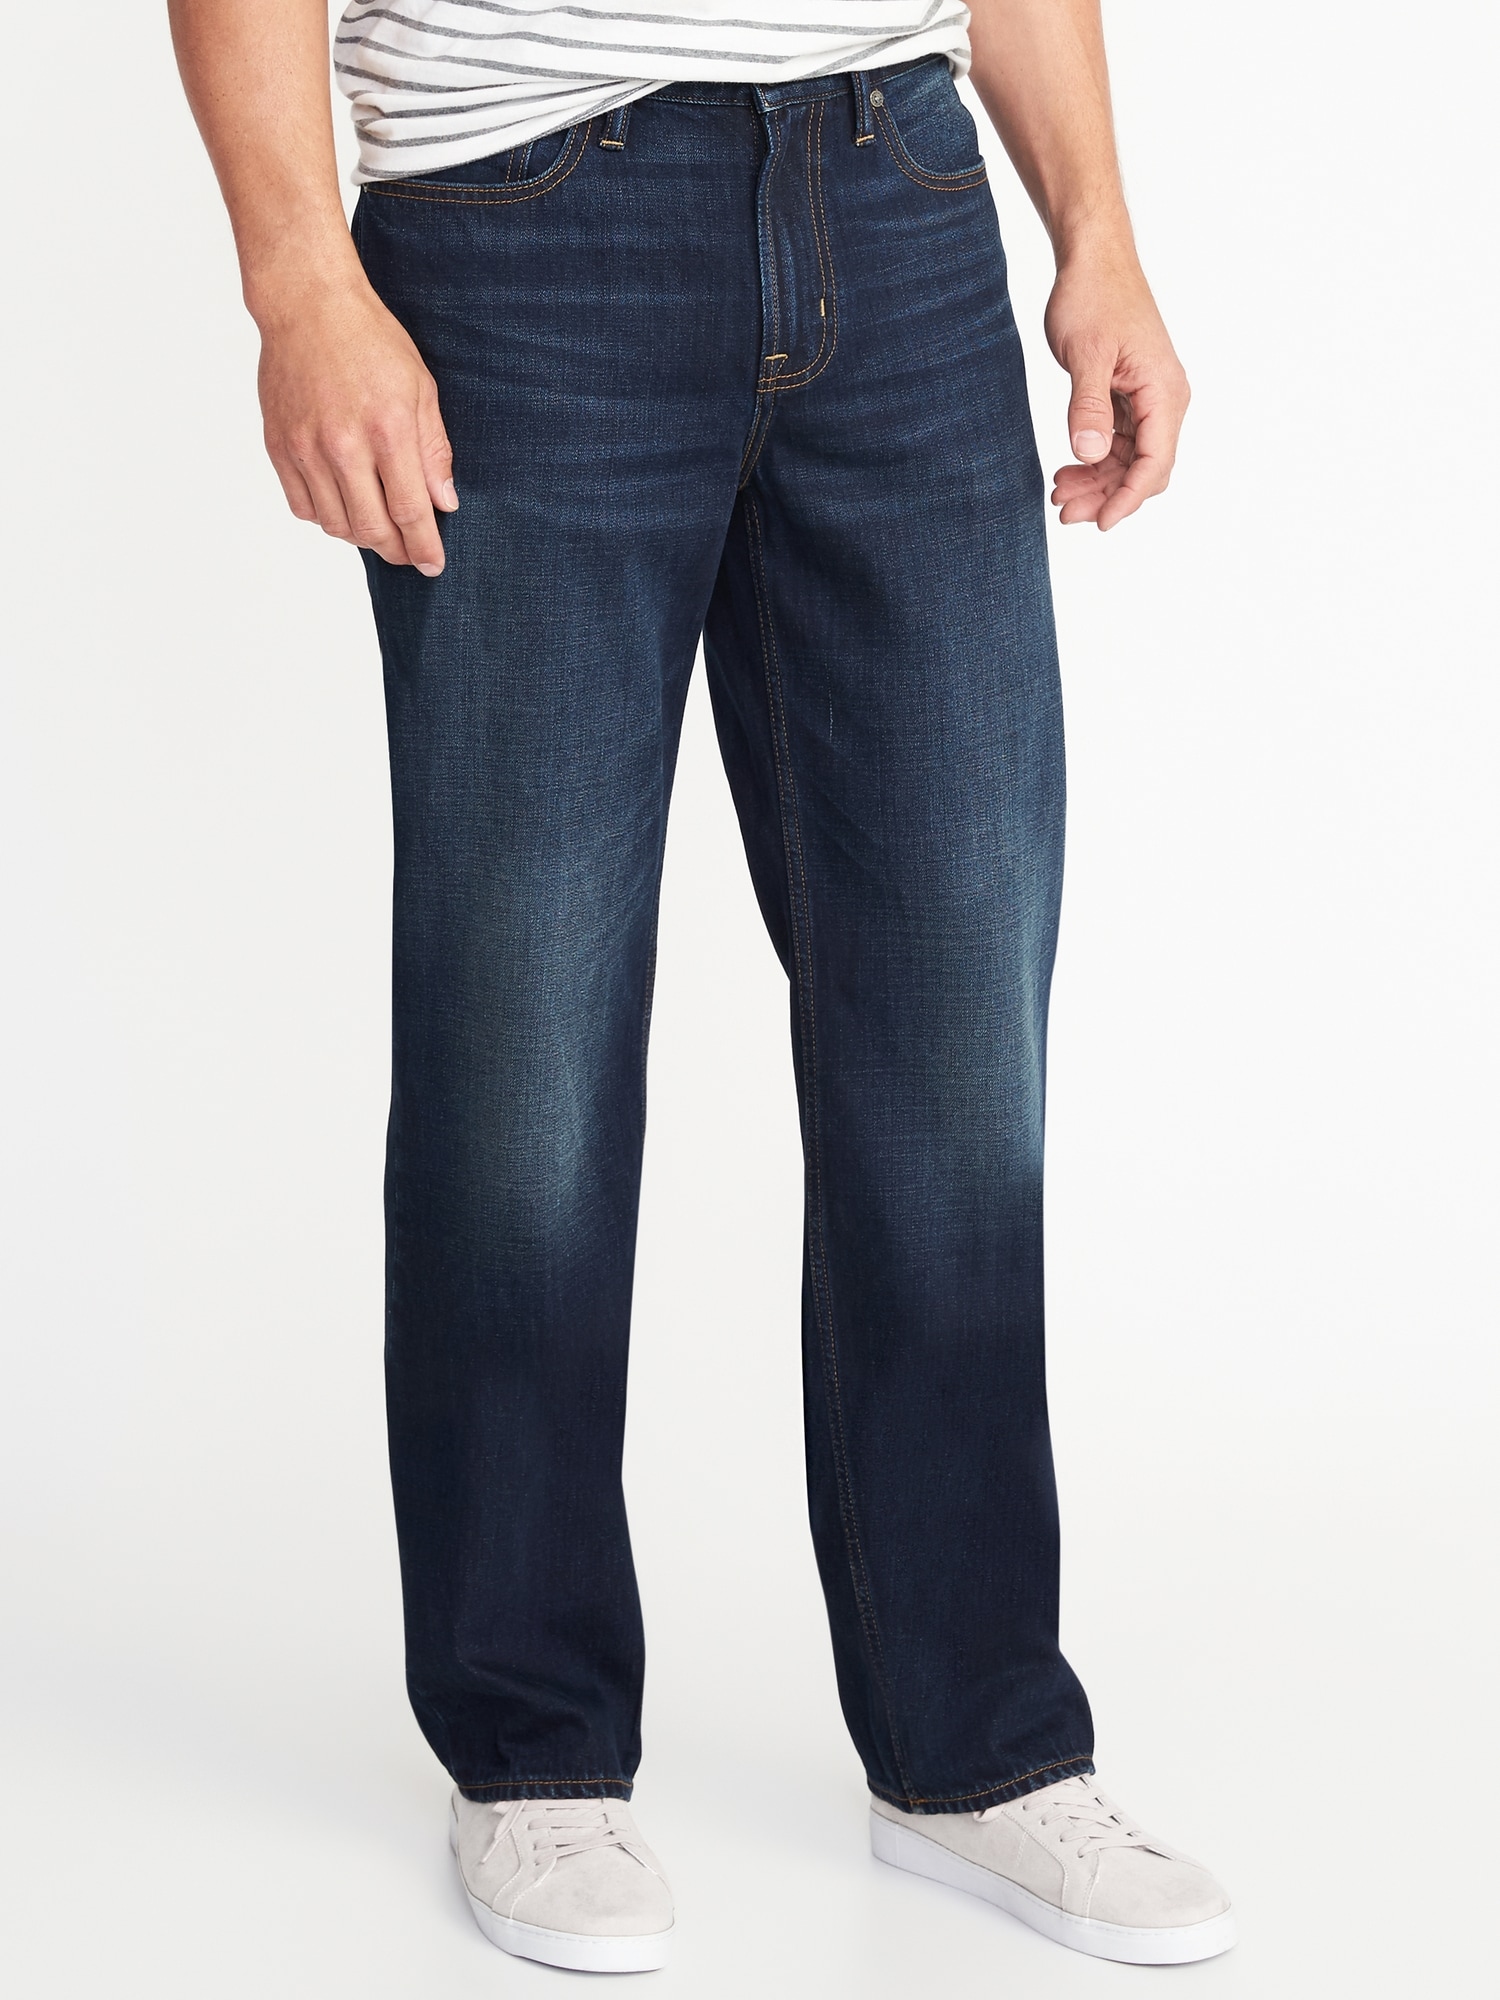 old navy mens jeans sizes